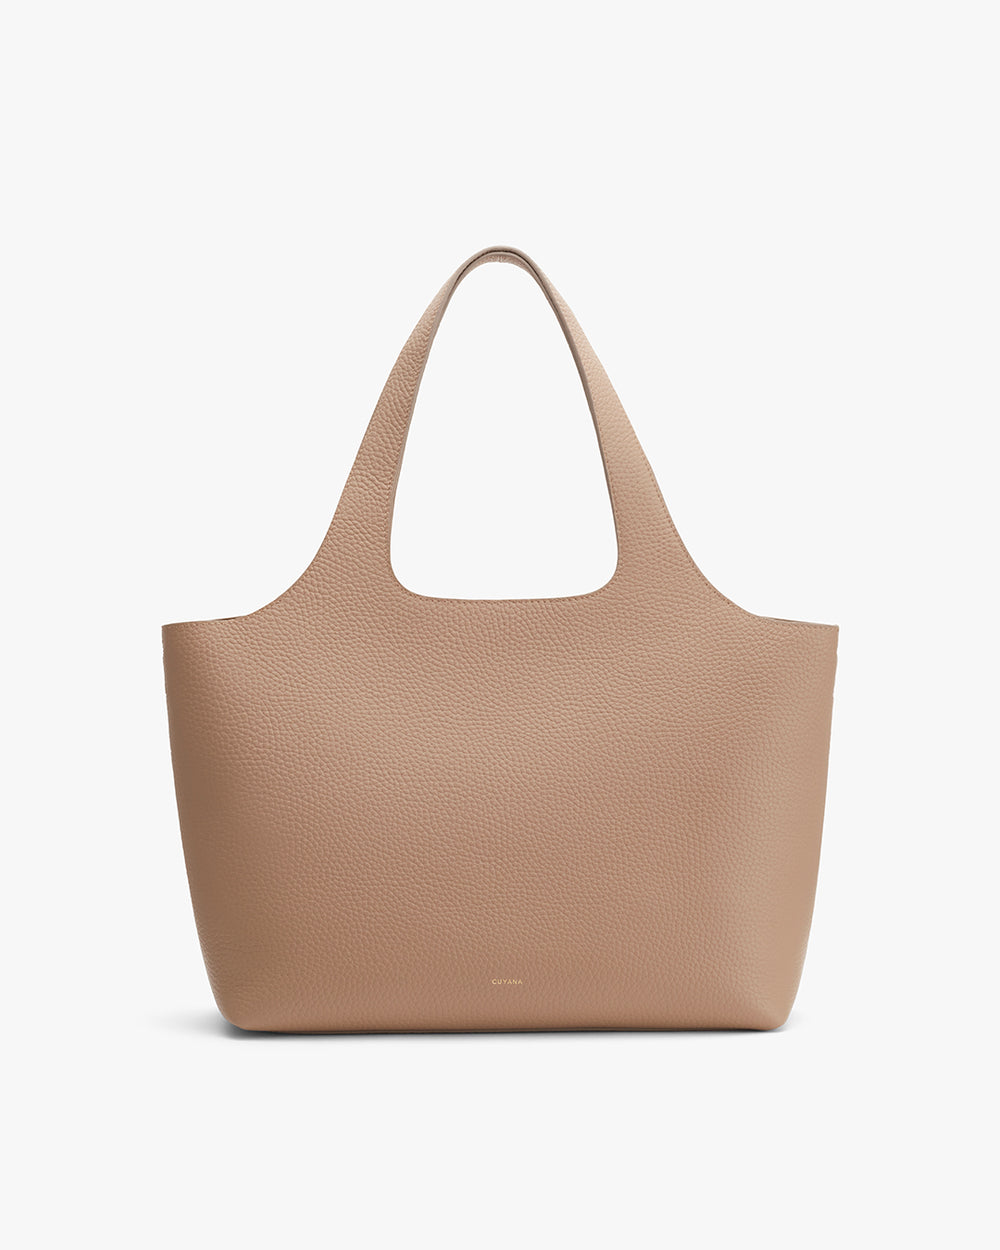 A large tote bag with two handles, isolated on a plain background.